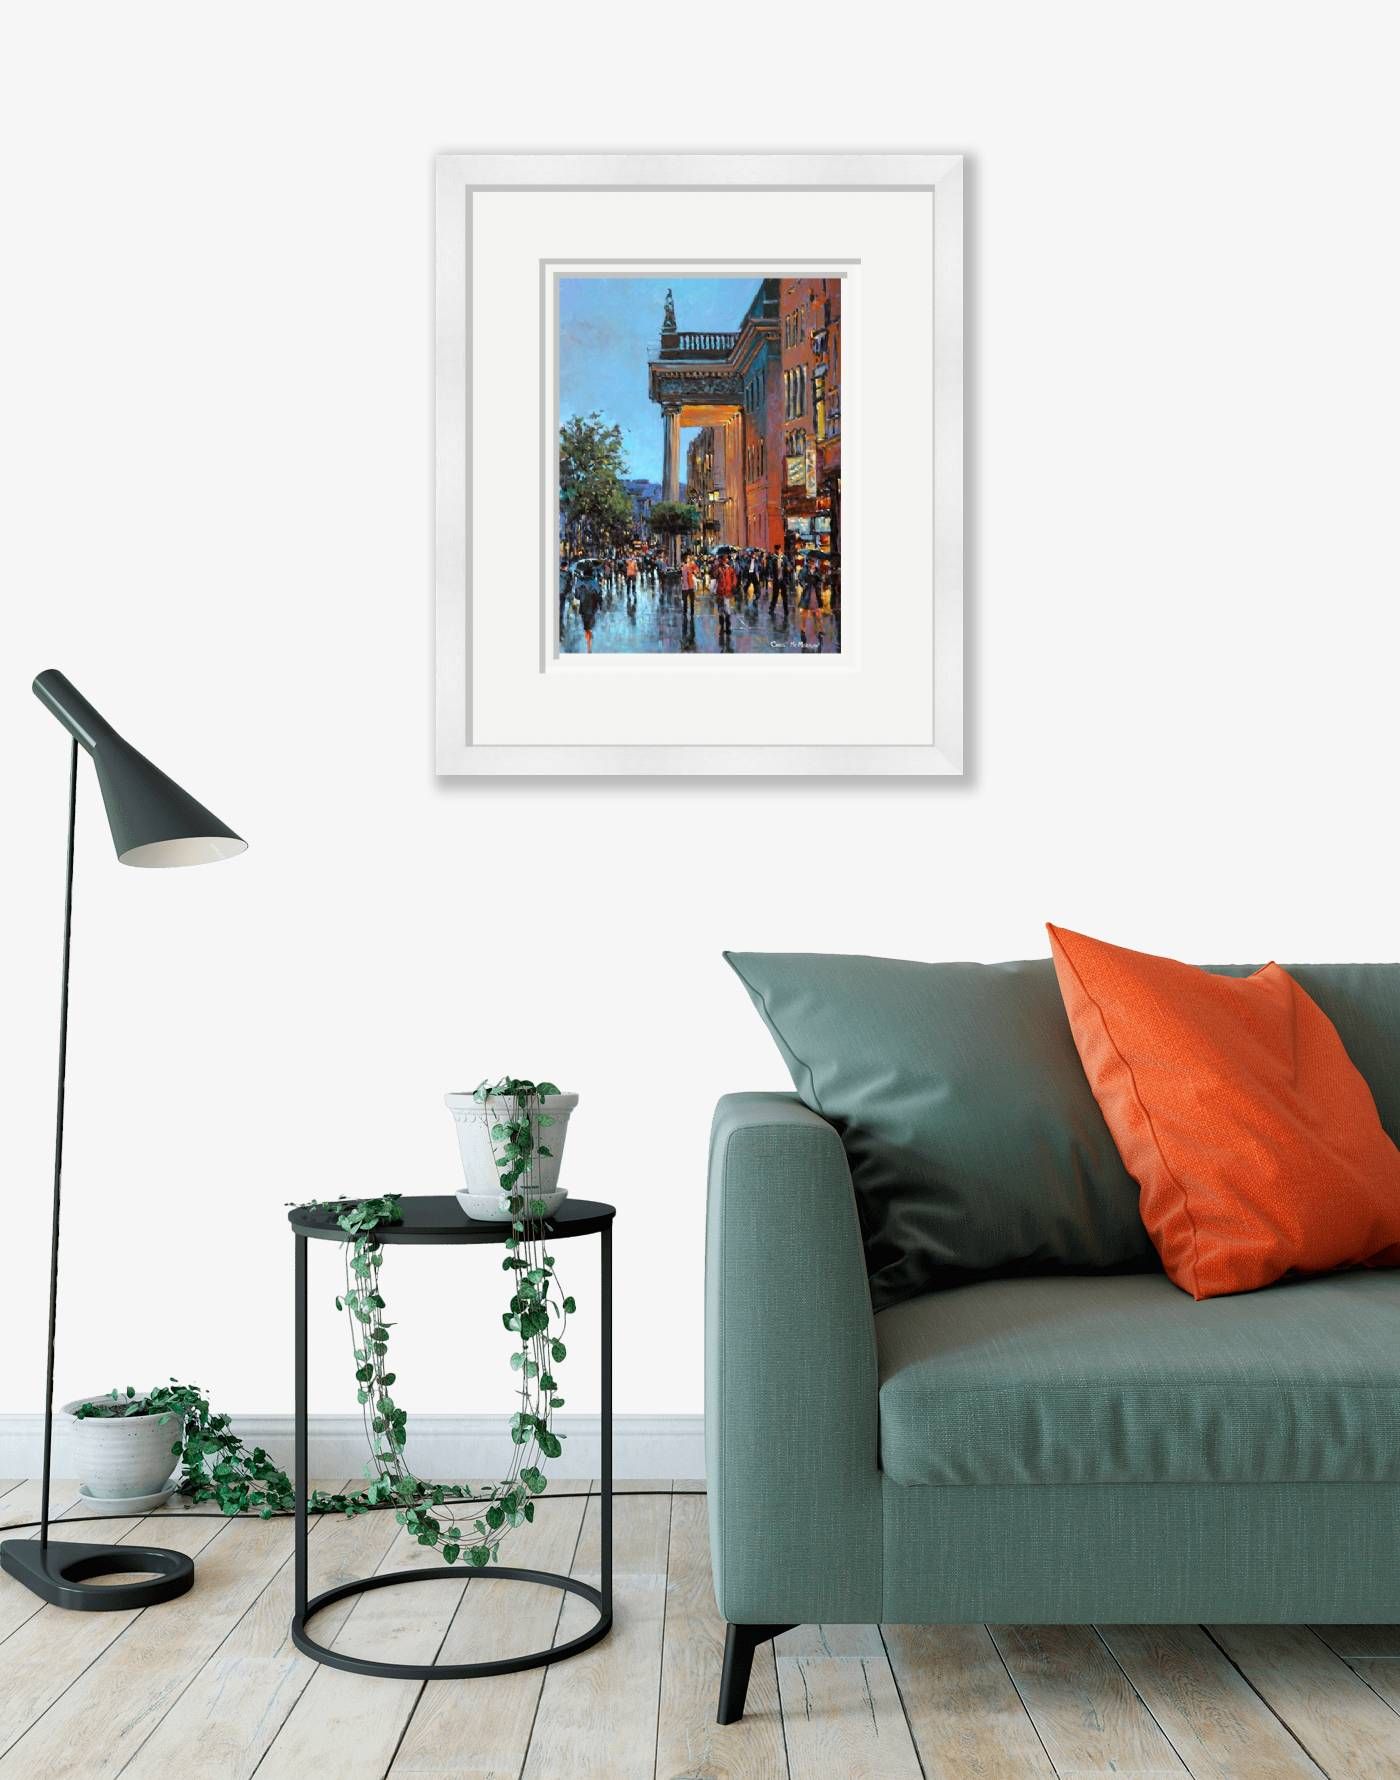 Large framed - GPO, O'Connell Street, Dublin - 343 by Chris McMorrow